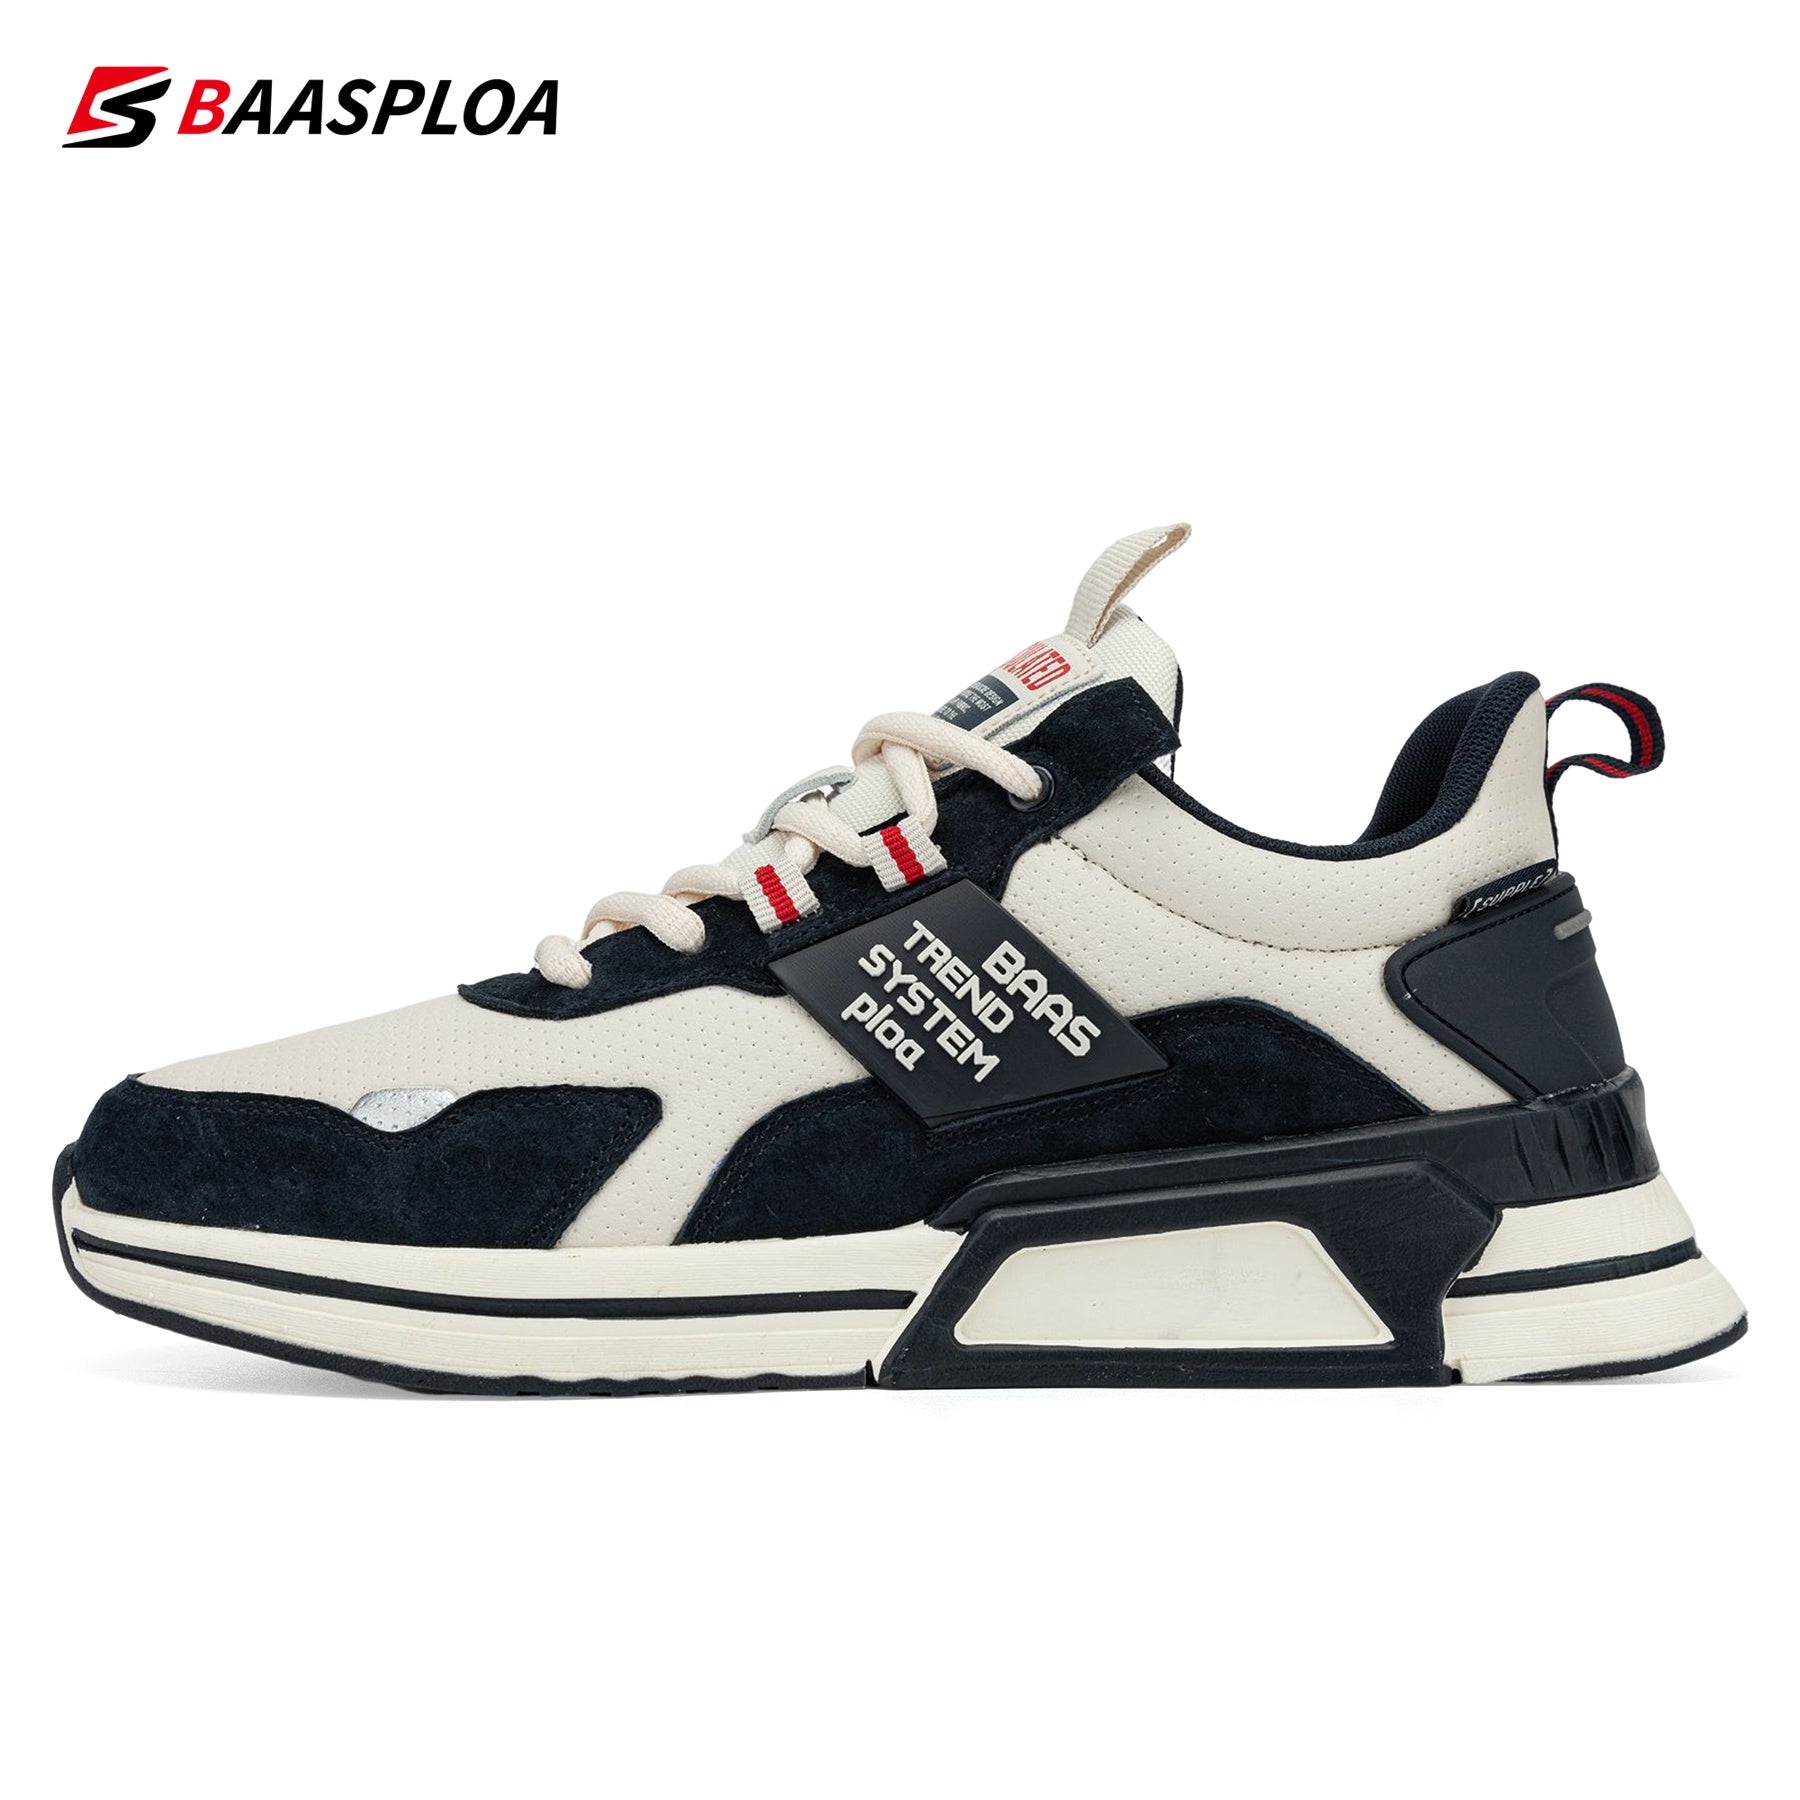 Men Fashion Leather Waterproof Casual Shoes Non-Slip Wear-Resistant Running Shoes Breathable Male Sneakers